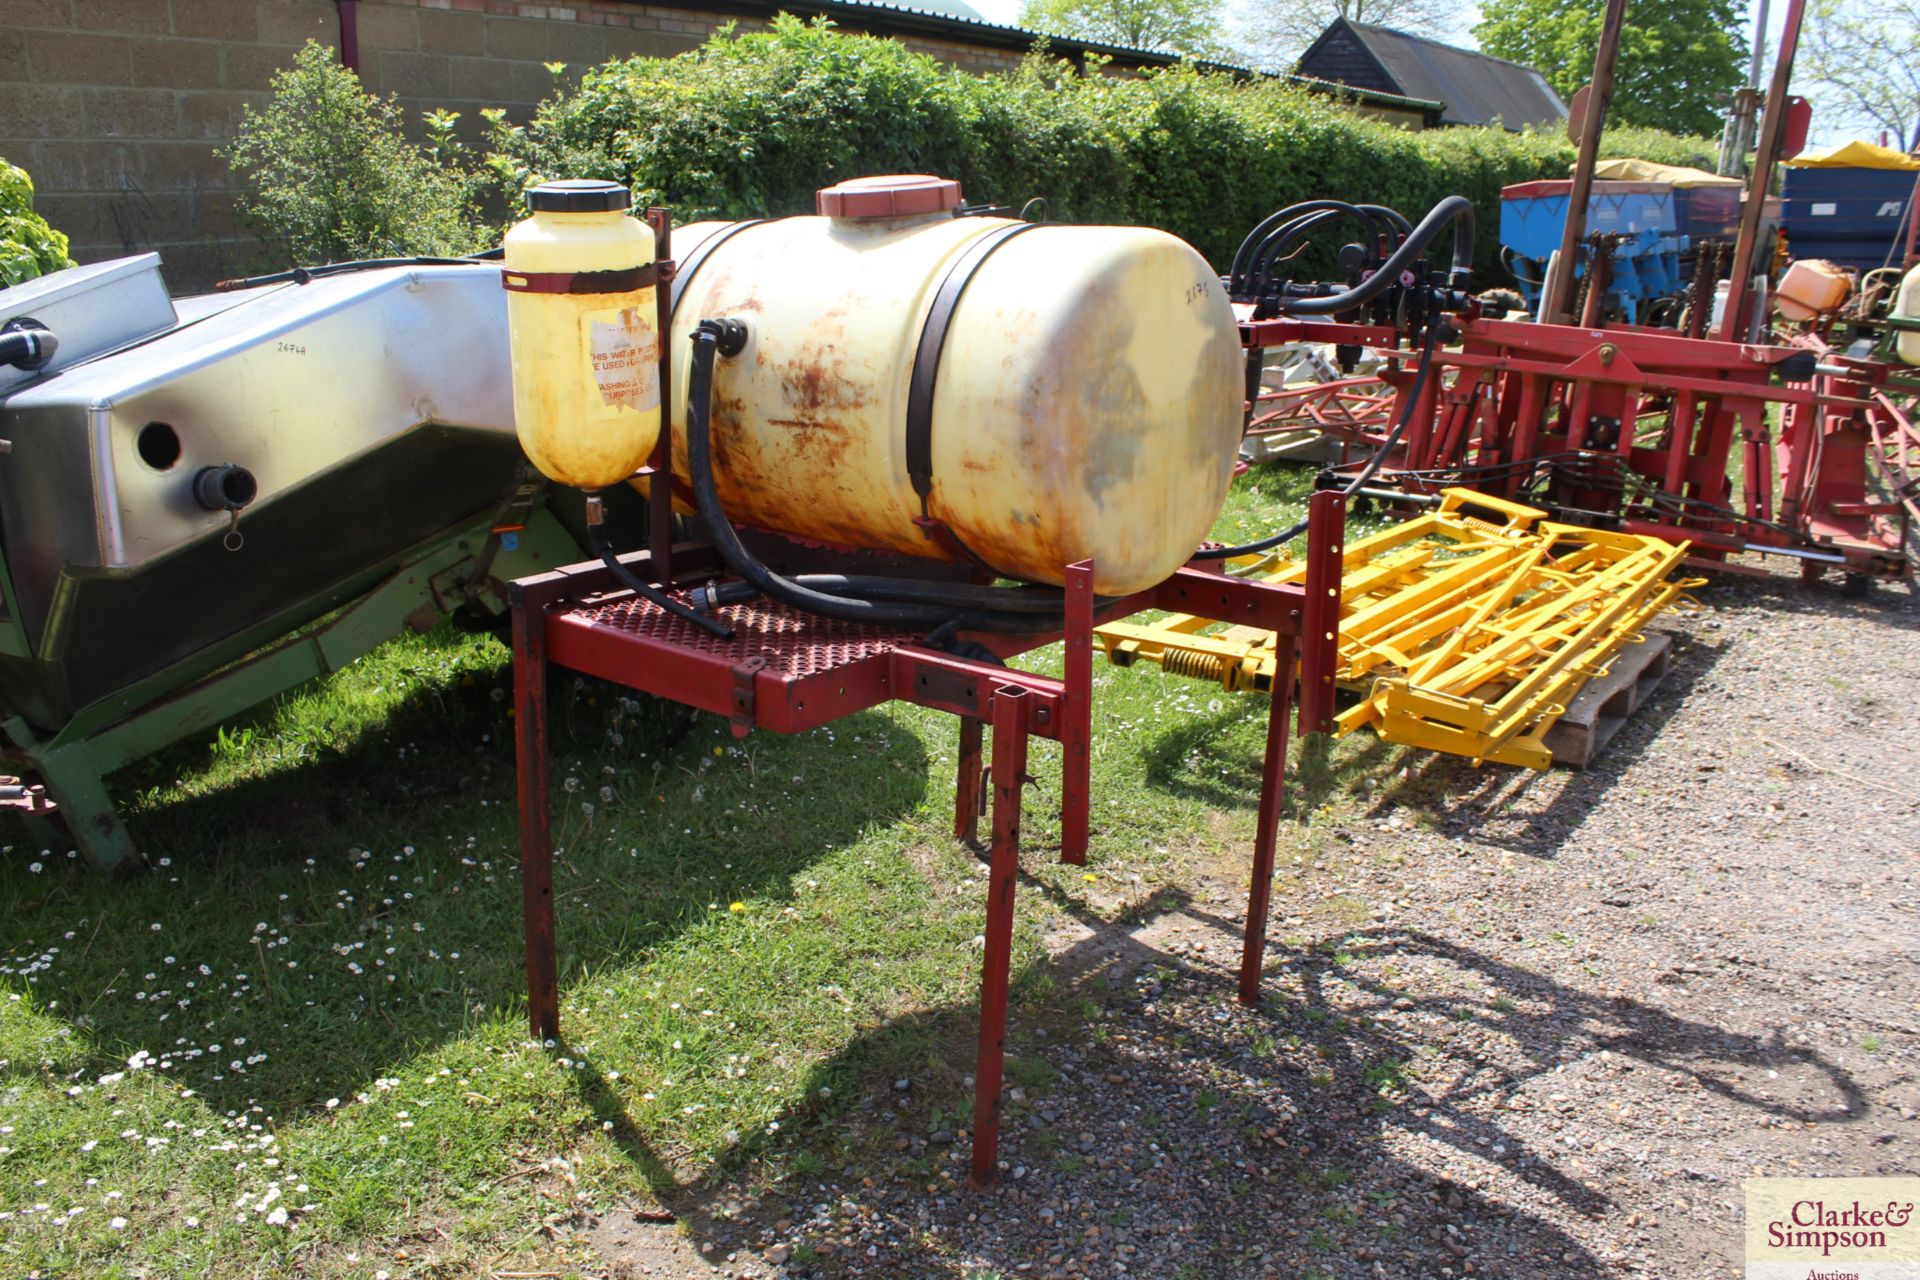 Hardi 50 linkage sprayer tank. With three section manual control and hand wash bowl. V